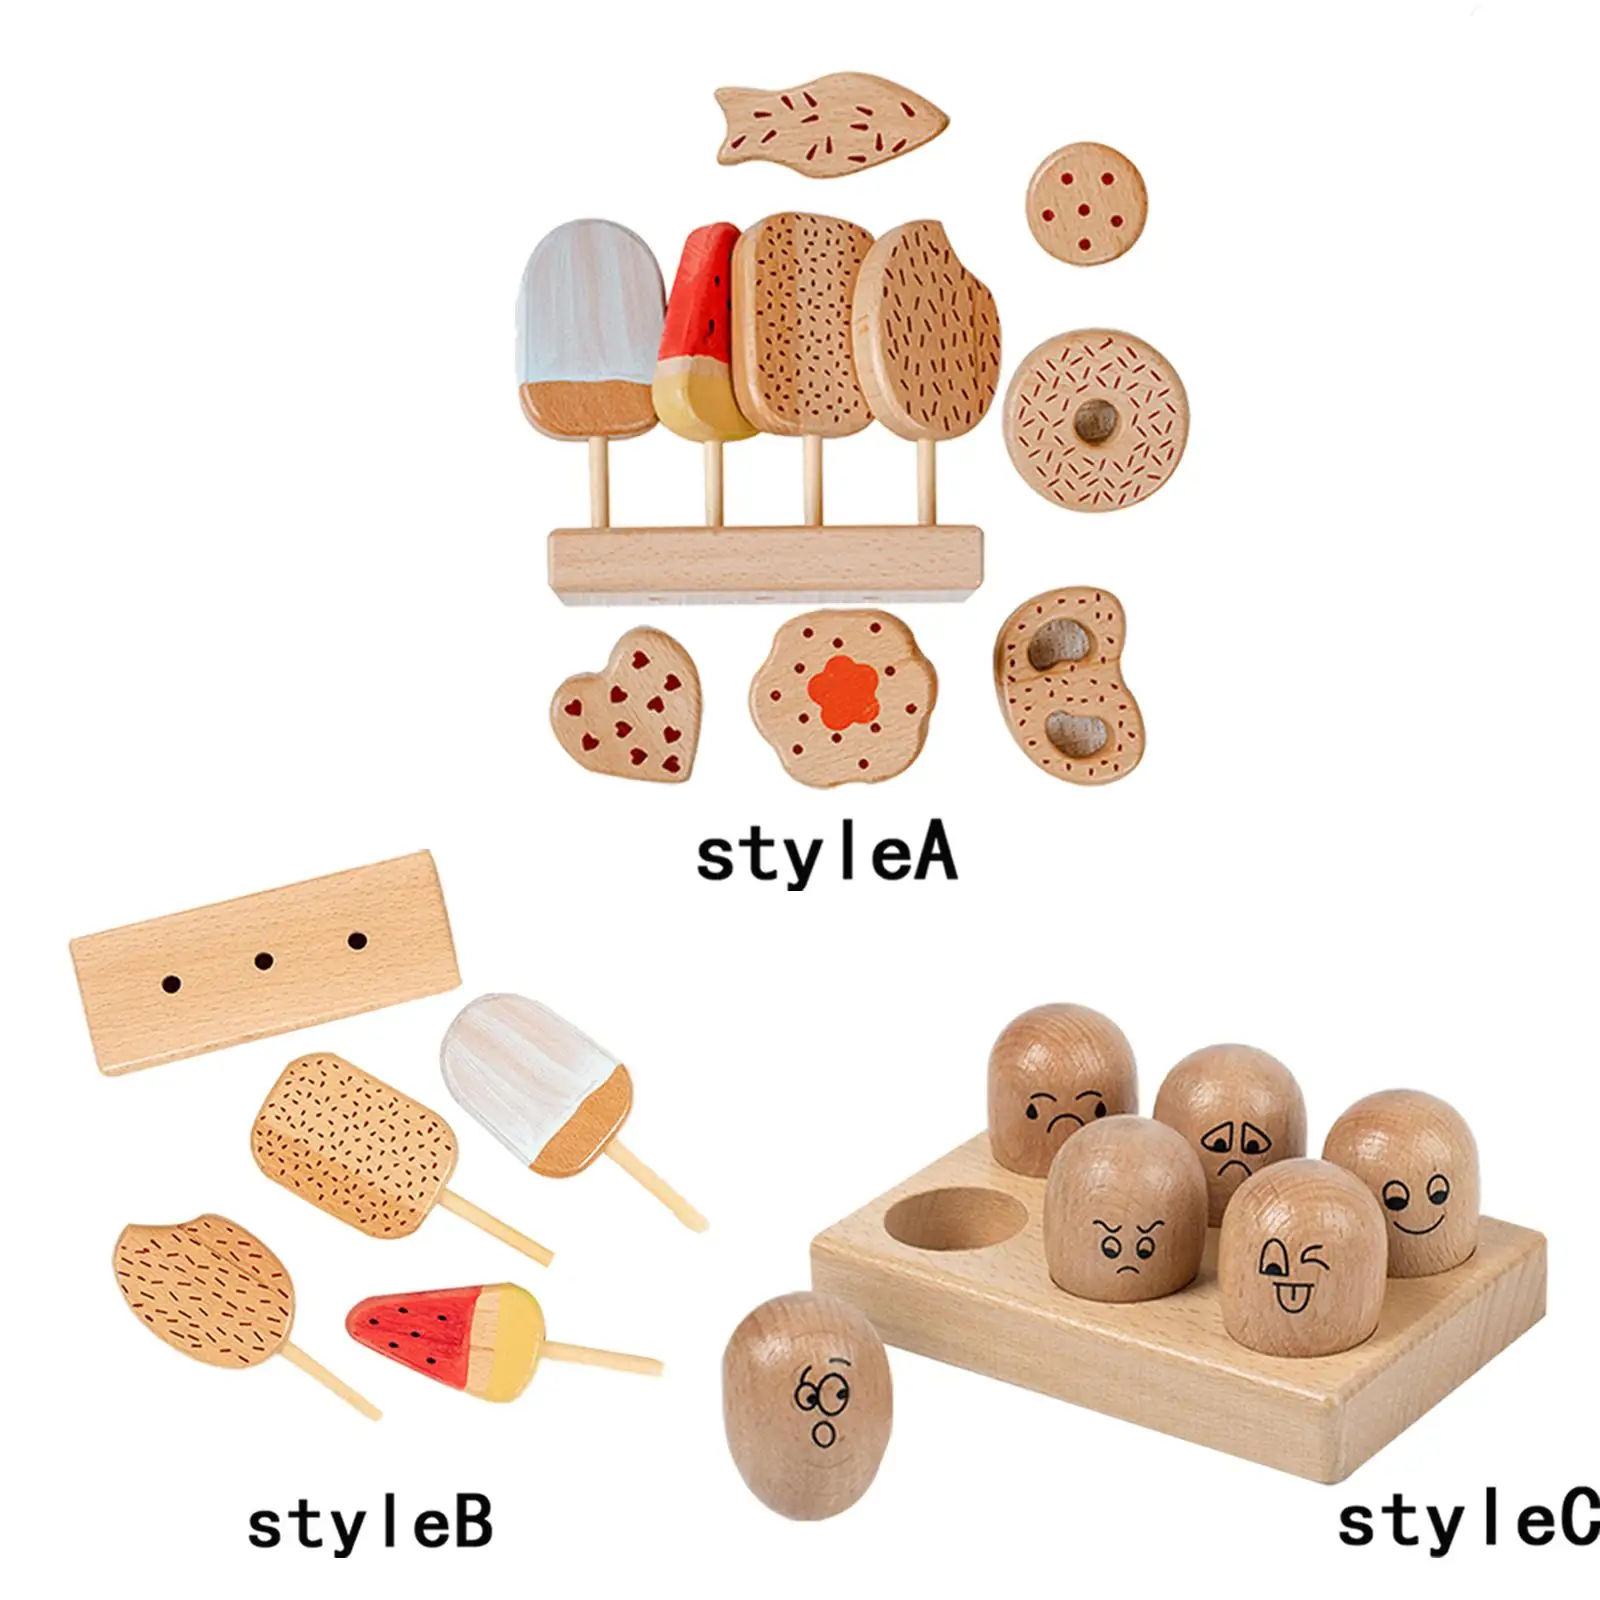 

Wooden Kitchen Food Toys Kitchen Playset Accessories Food Dessert Playset Role Play Cooking Toys for Toddlers Kids